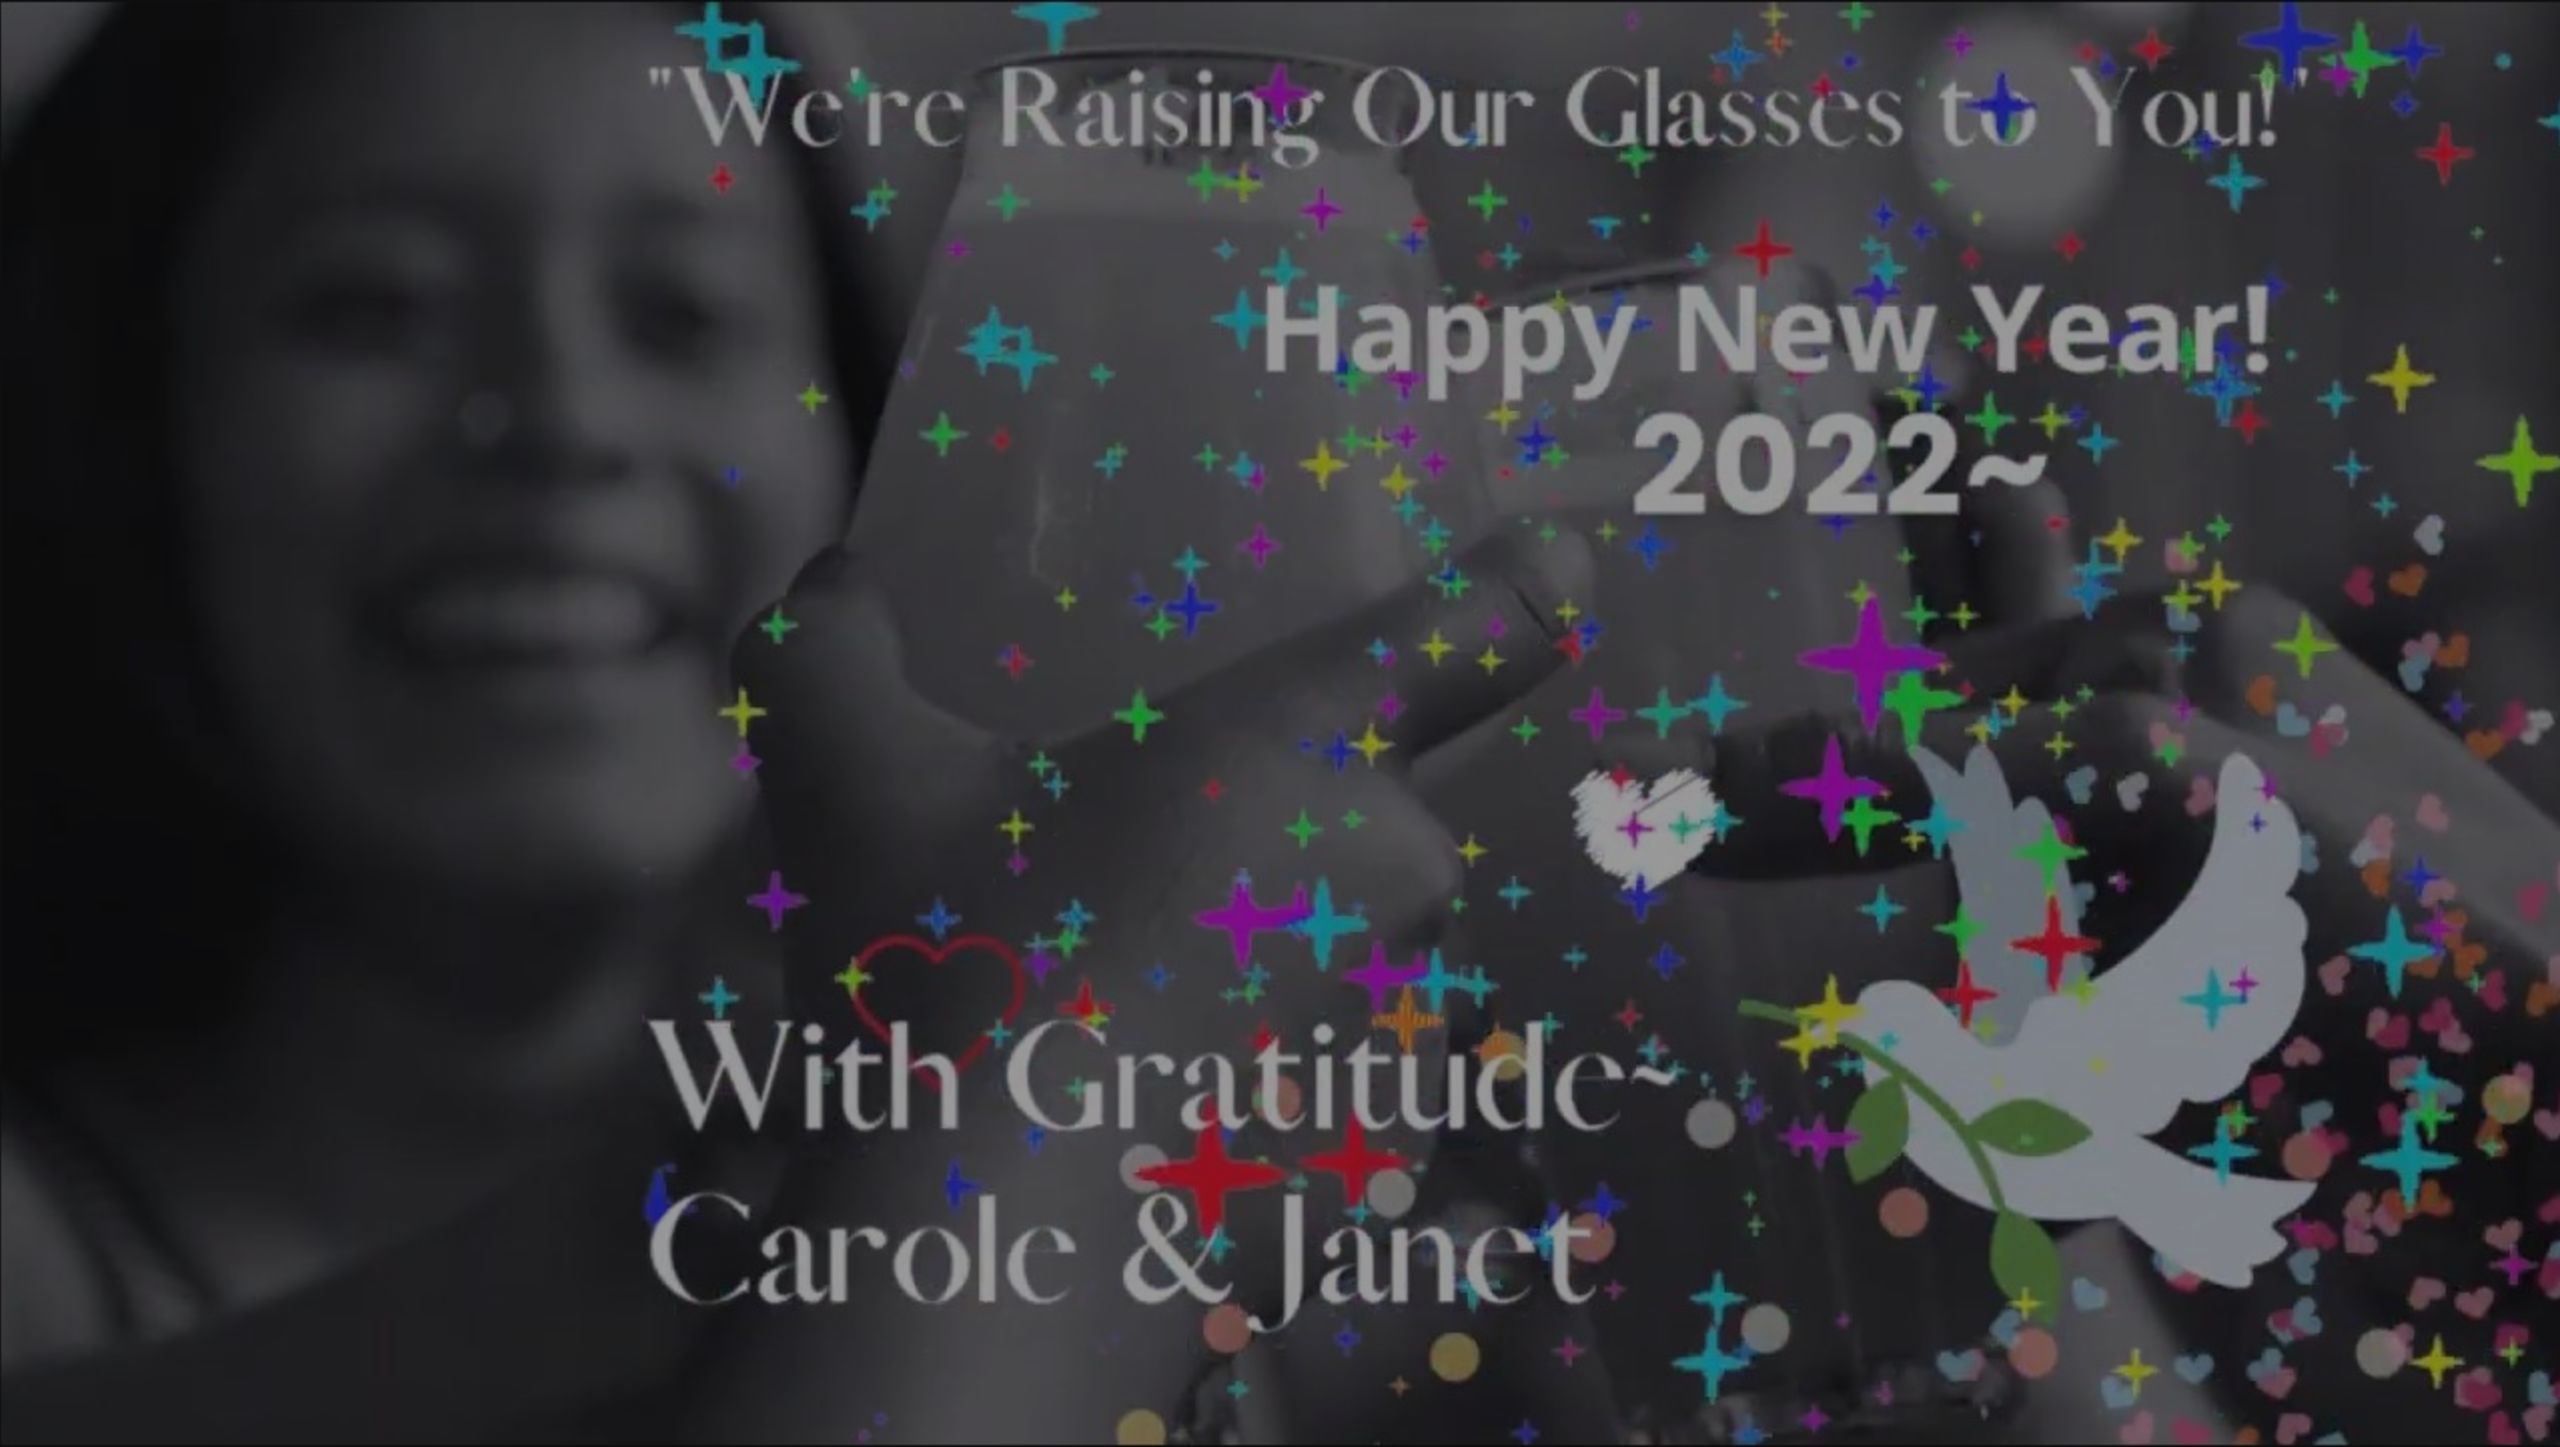 Carole and Janet Raise their Glasses, Wishing You A Blessed and Happy New Year~  2022